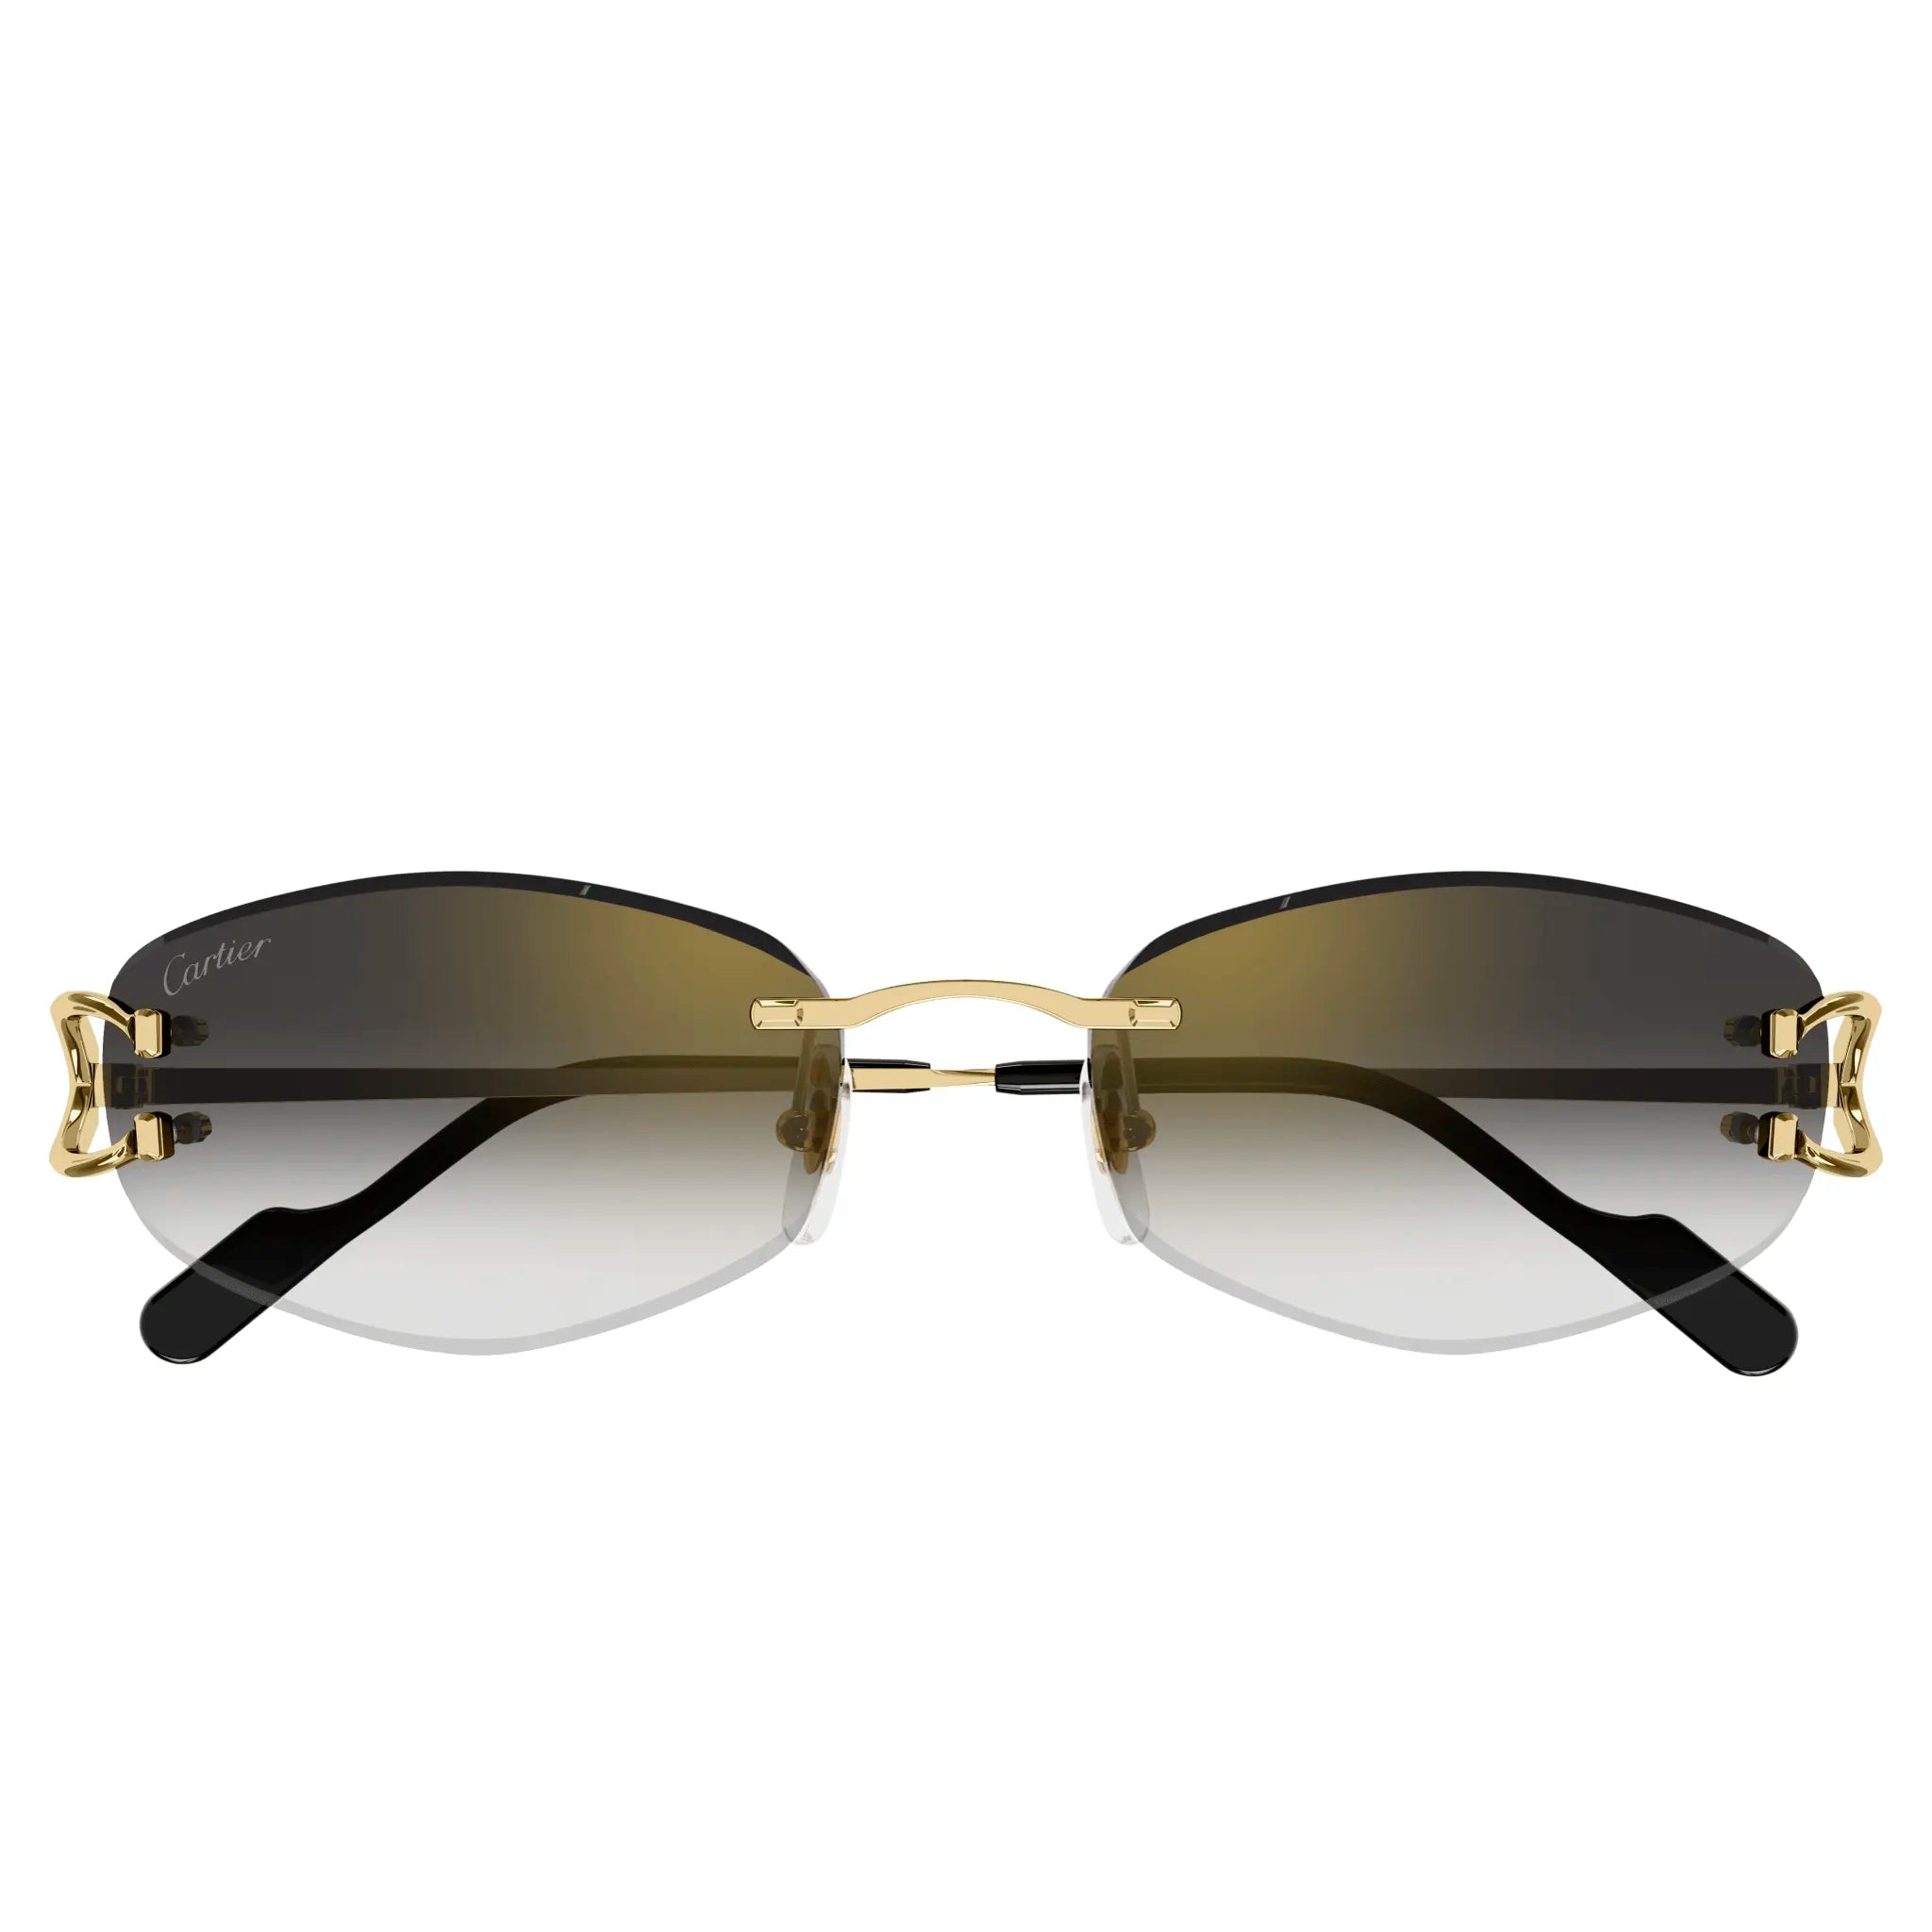 Folded view of Cartier Eyewear CT0467S-001 Gold Grey Sunglasses